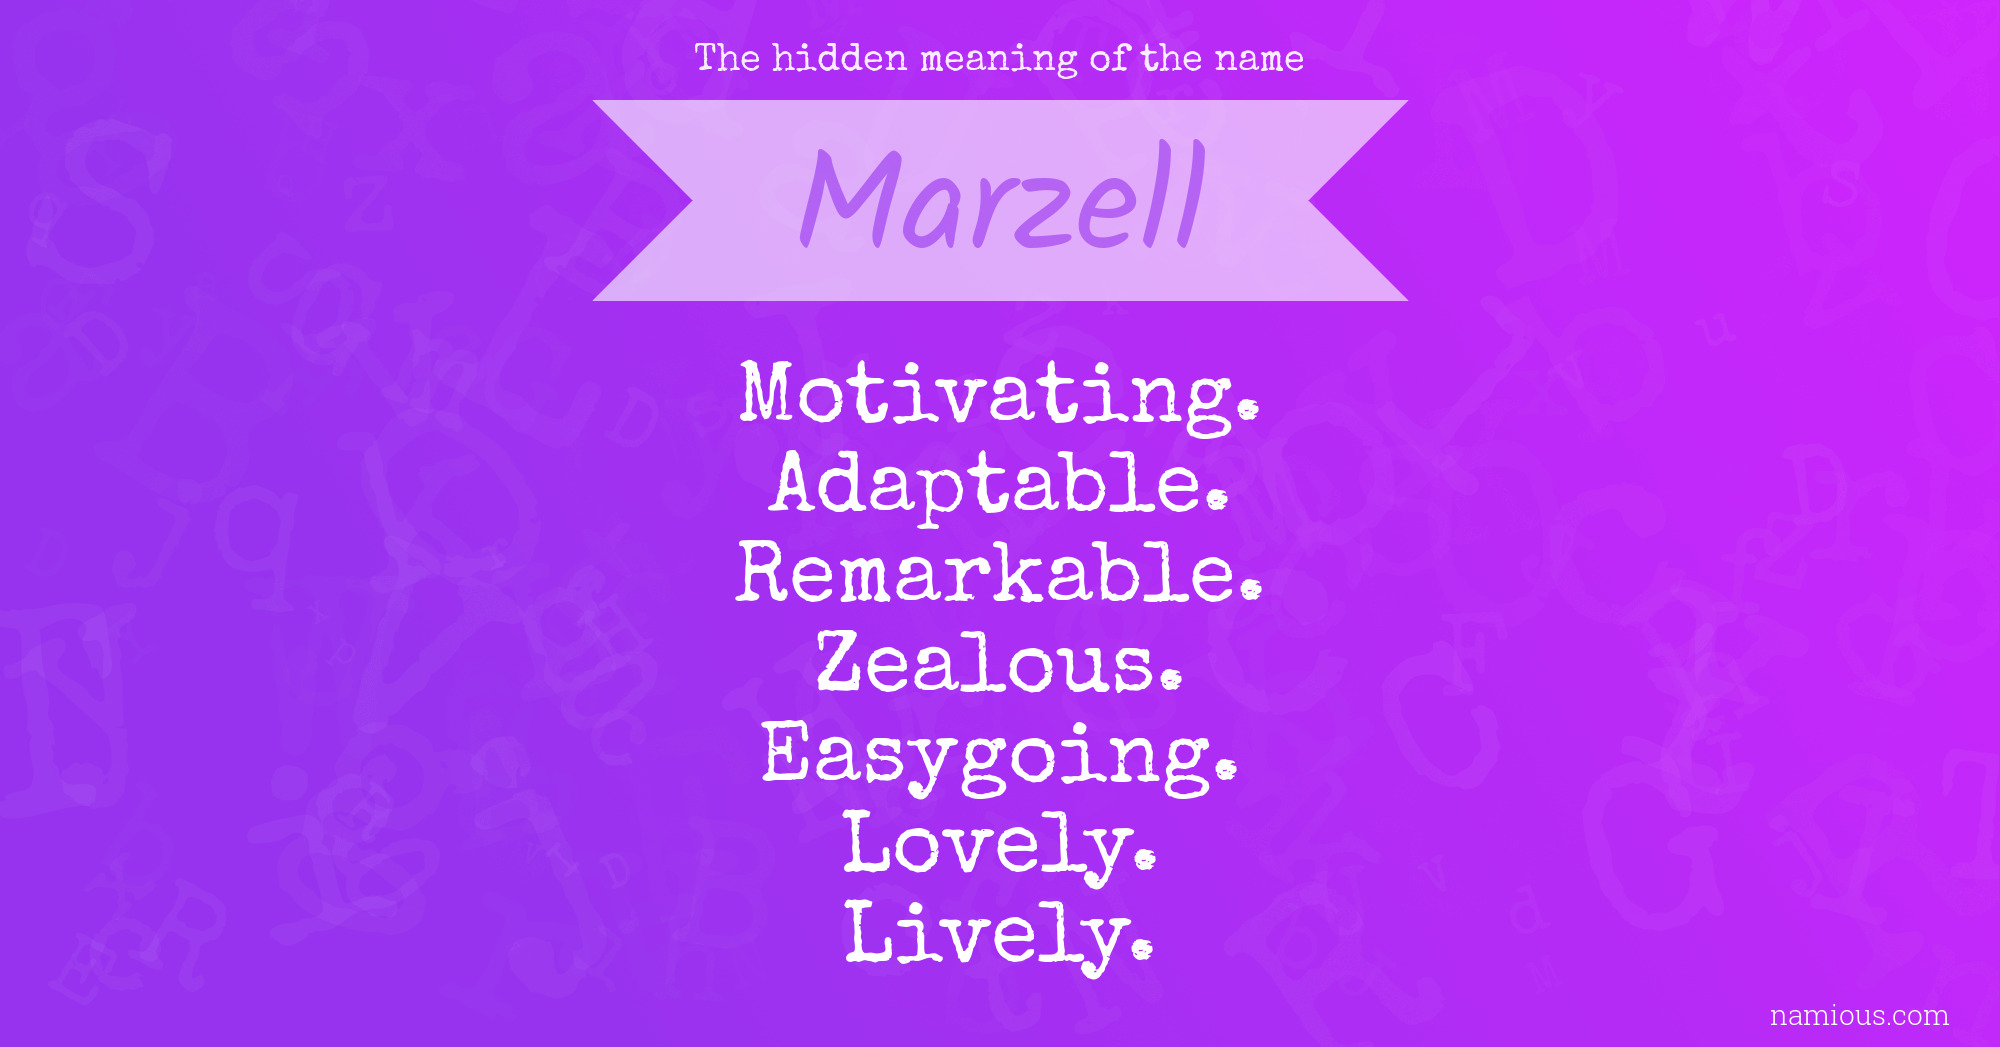 The hidden meaning of the name Marzell